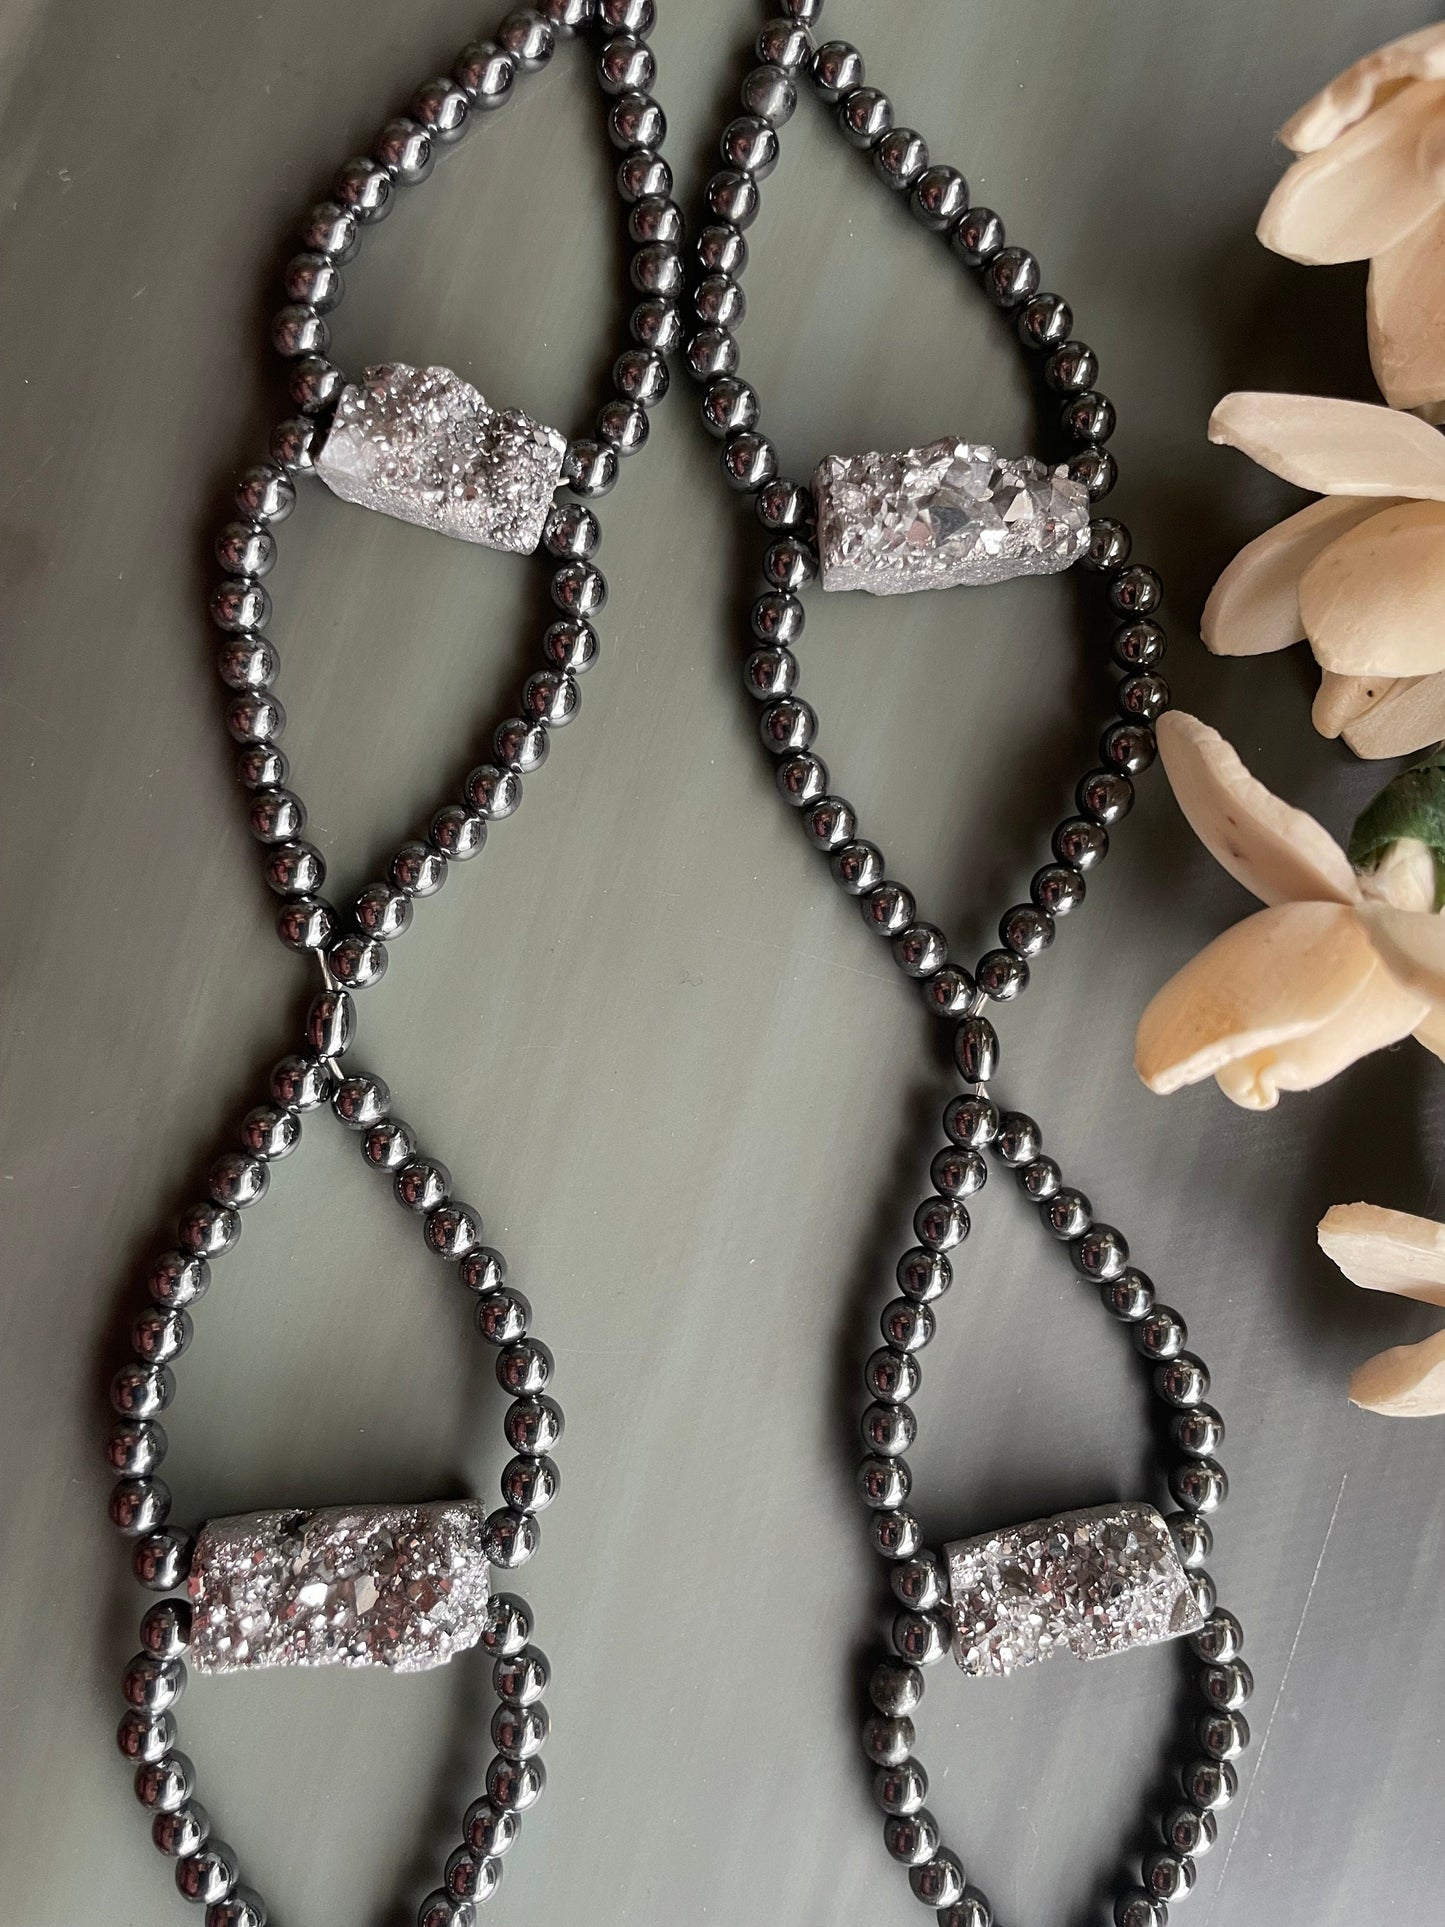 Platinum Druzy and Hematite long length necklace sitting on a stone tablet.